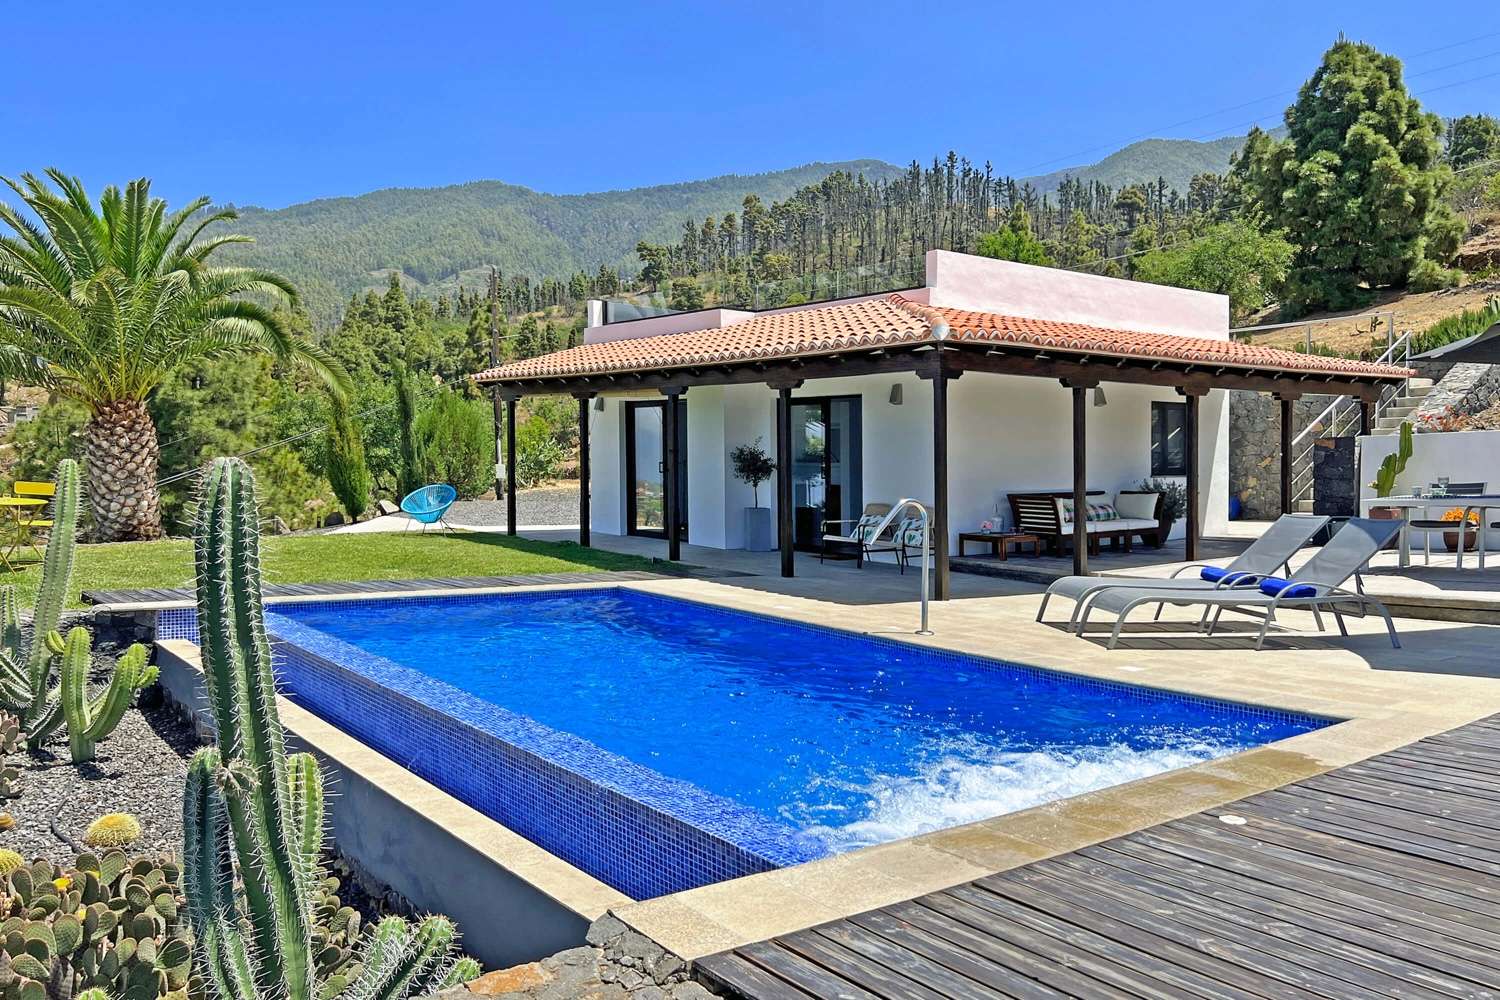 Very nice, small holiday home with modern furniture and private pool. The ideal place to relax and as a starting point for excursions and for hiking.